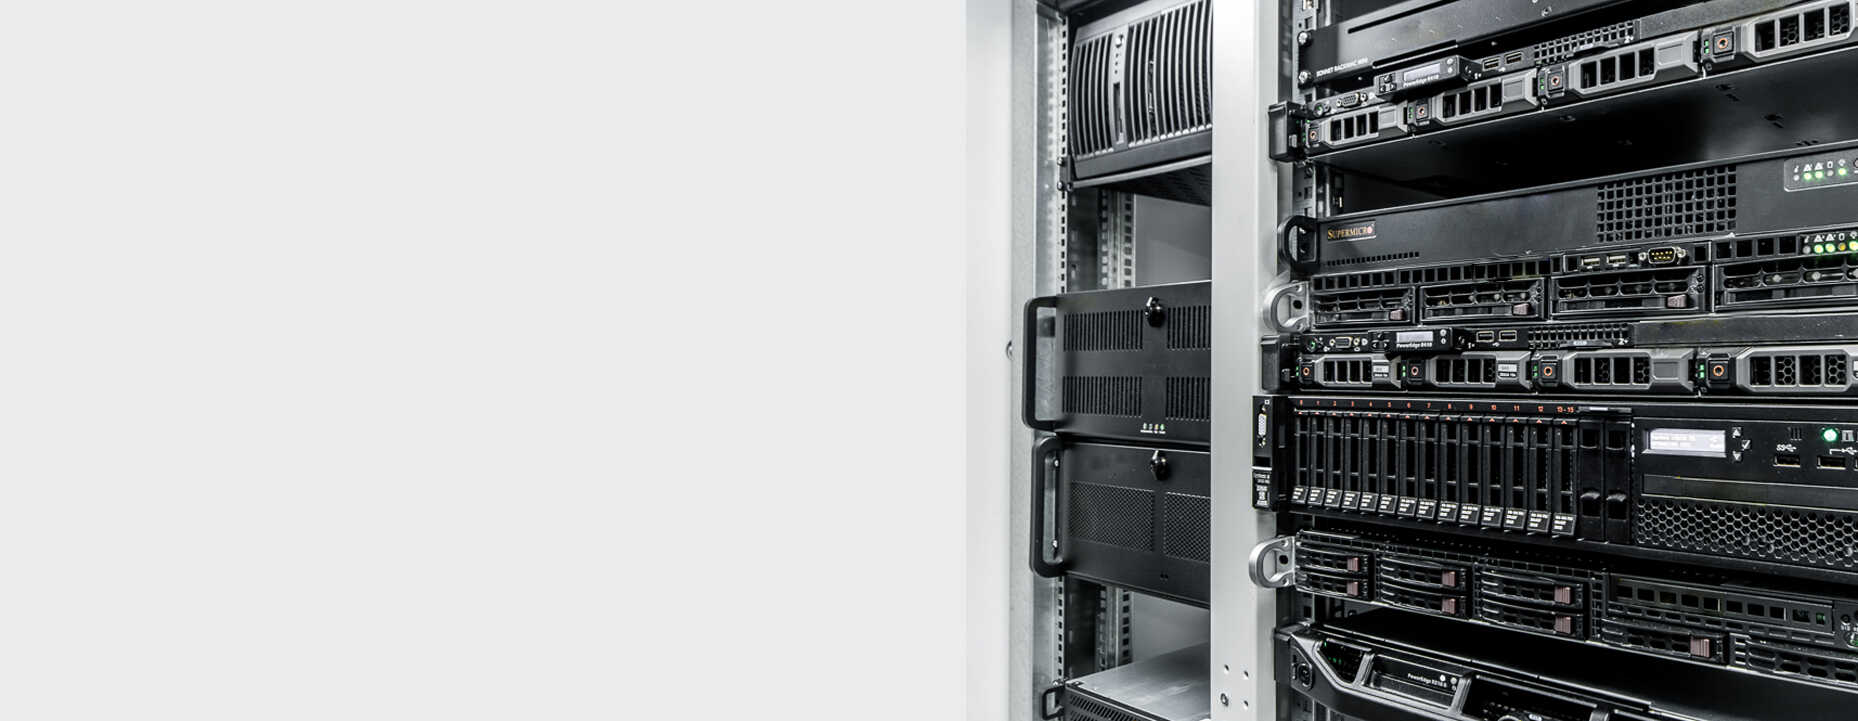 All information around rack and tower colocation